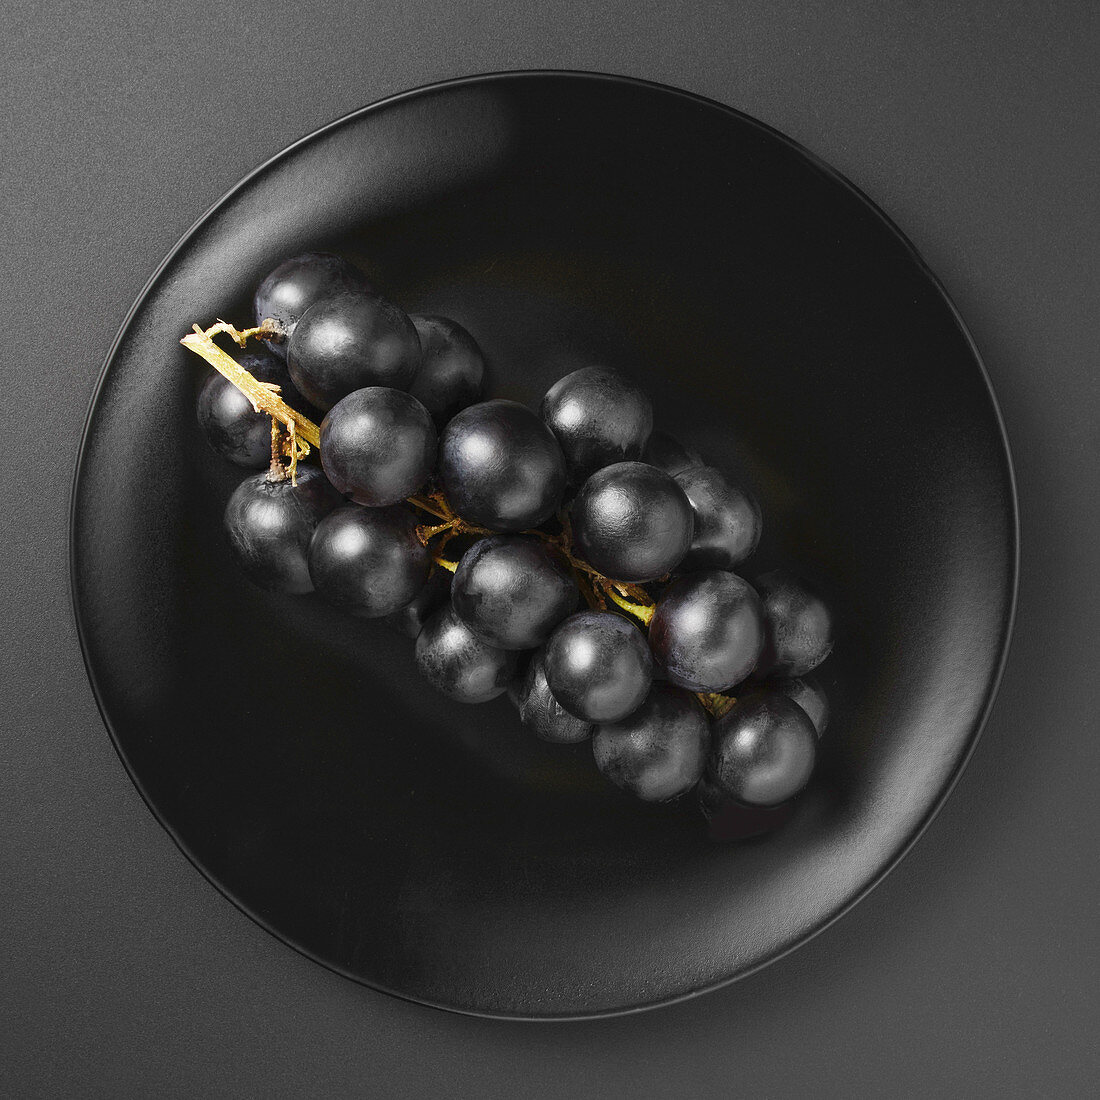 A bunch of black grapes on a black matte plate on a black background